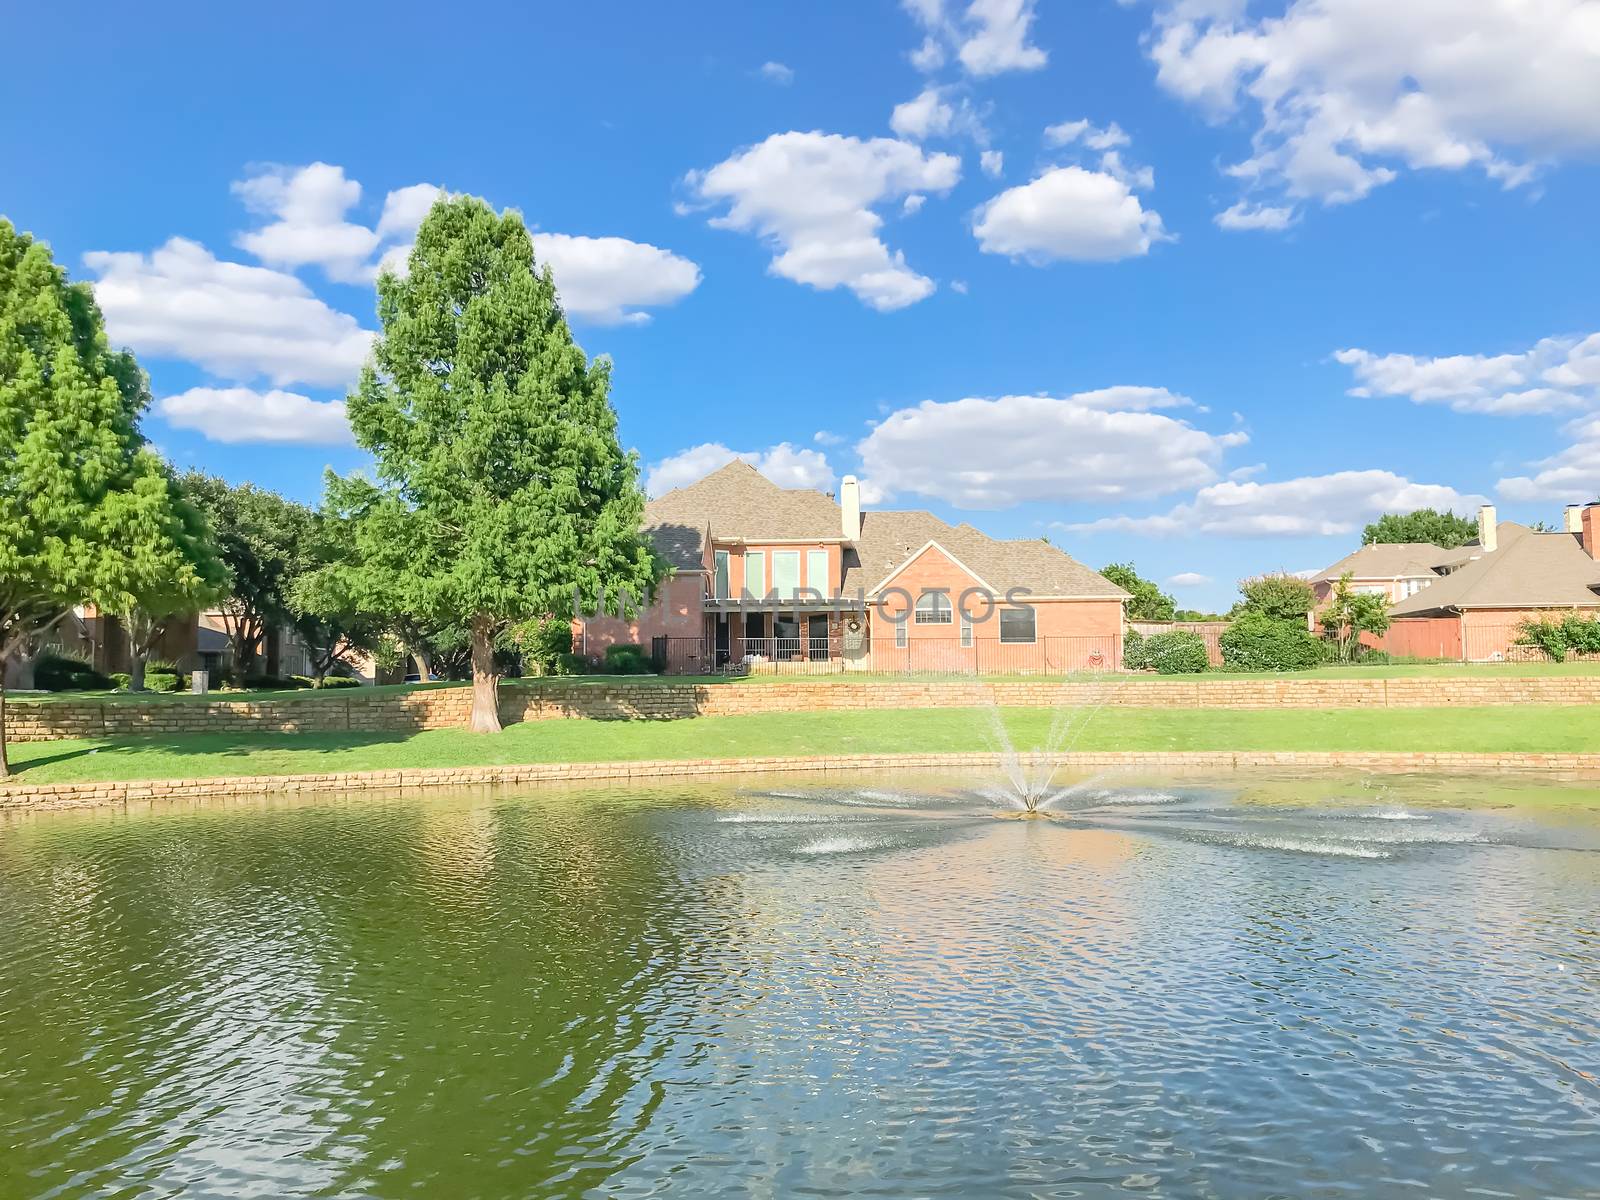 Lakefront houses with water fountain and green grass lawn bank in suburbs Dallas, Texas, USA. Suburban single family detached home along river with high stone retaining wall, sewage, mature tree